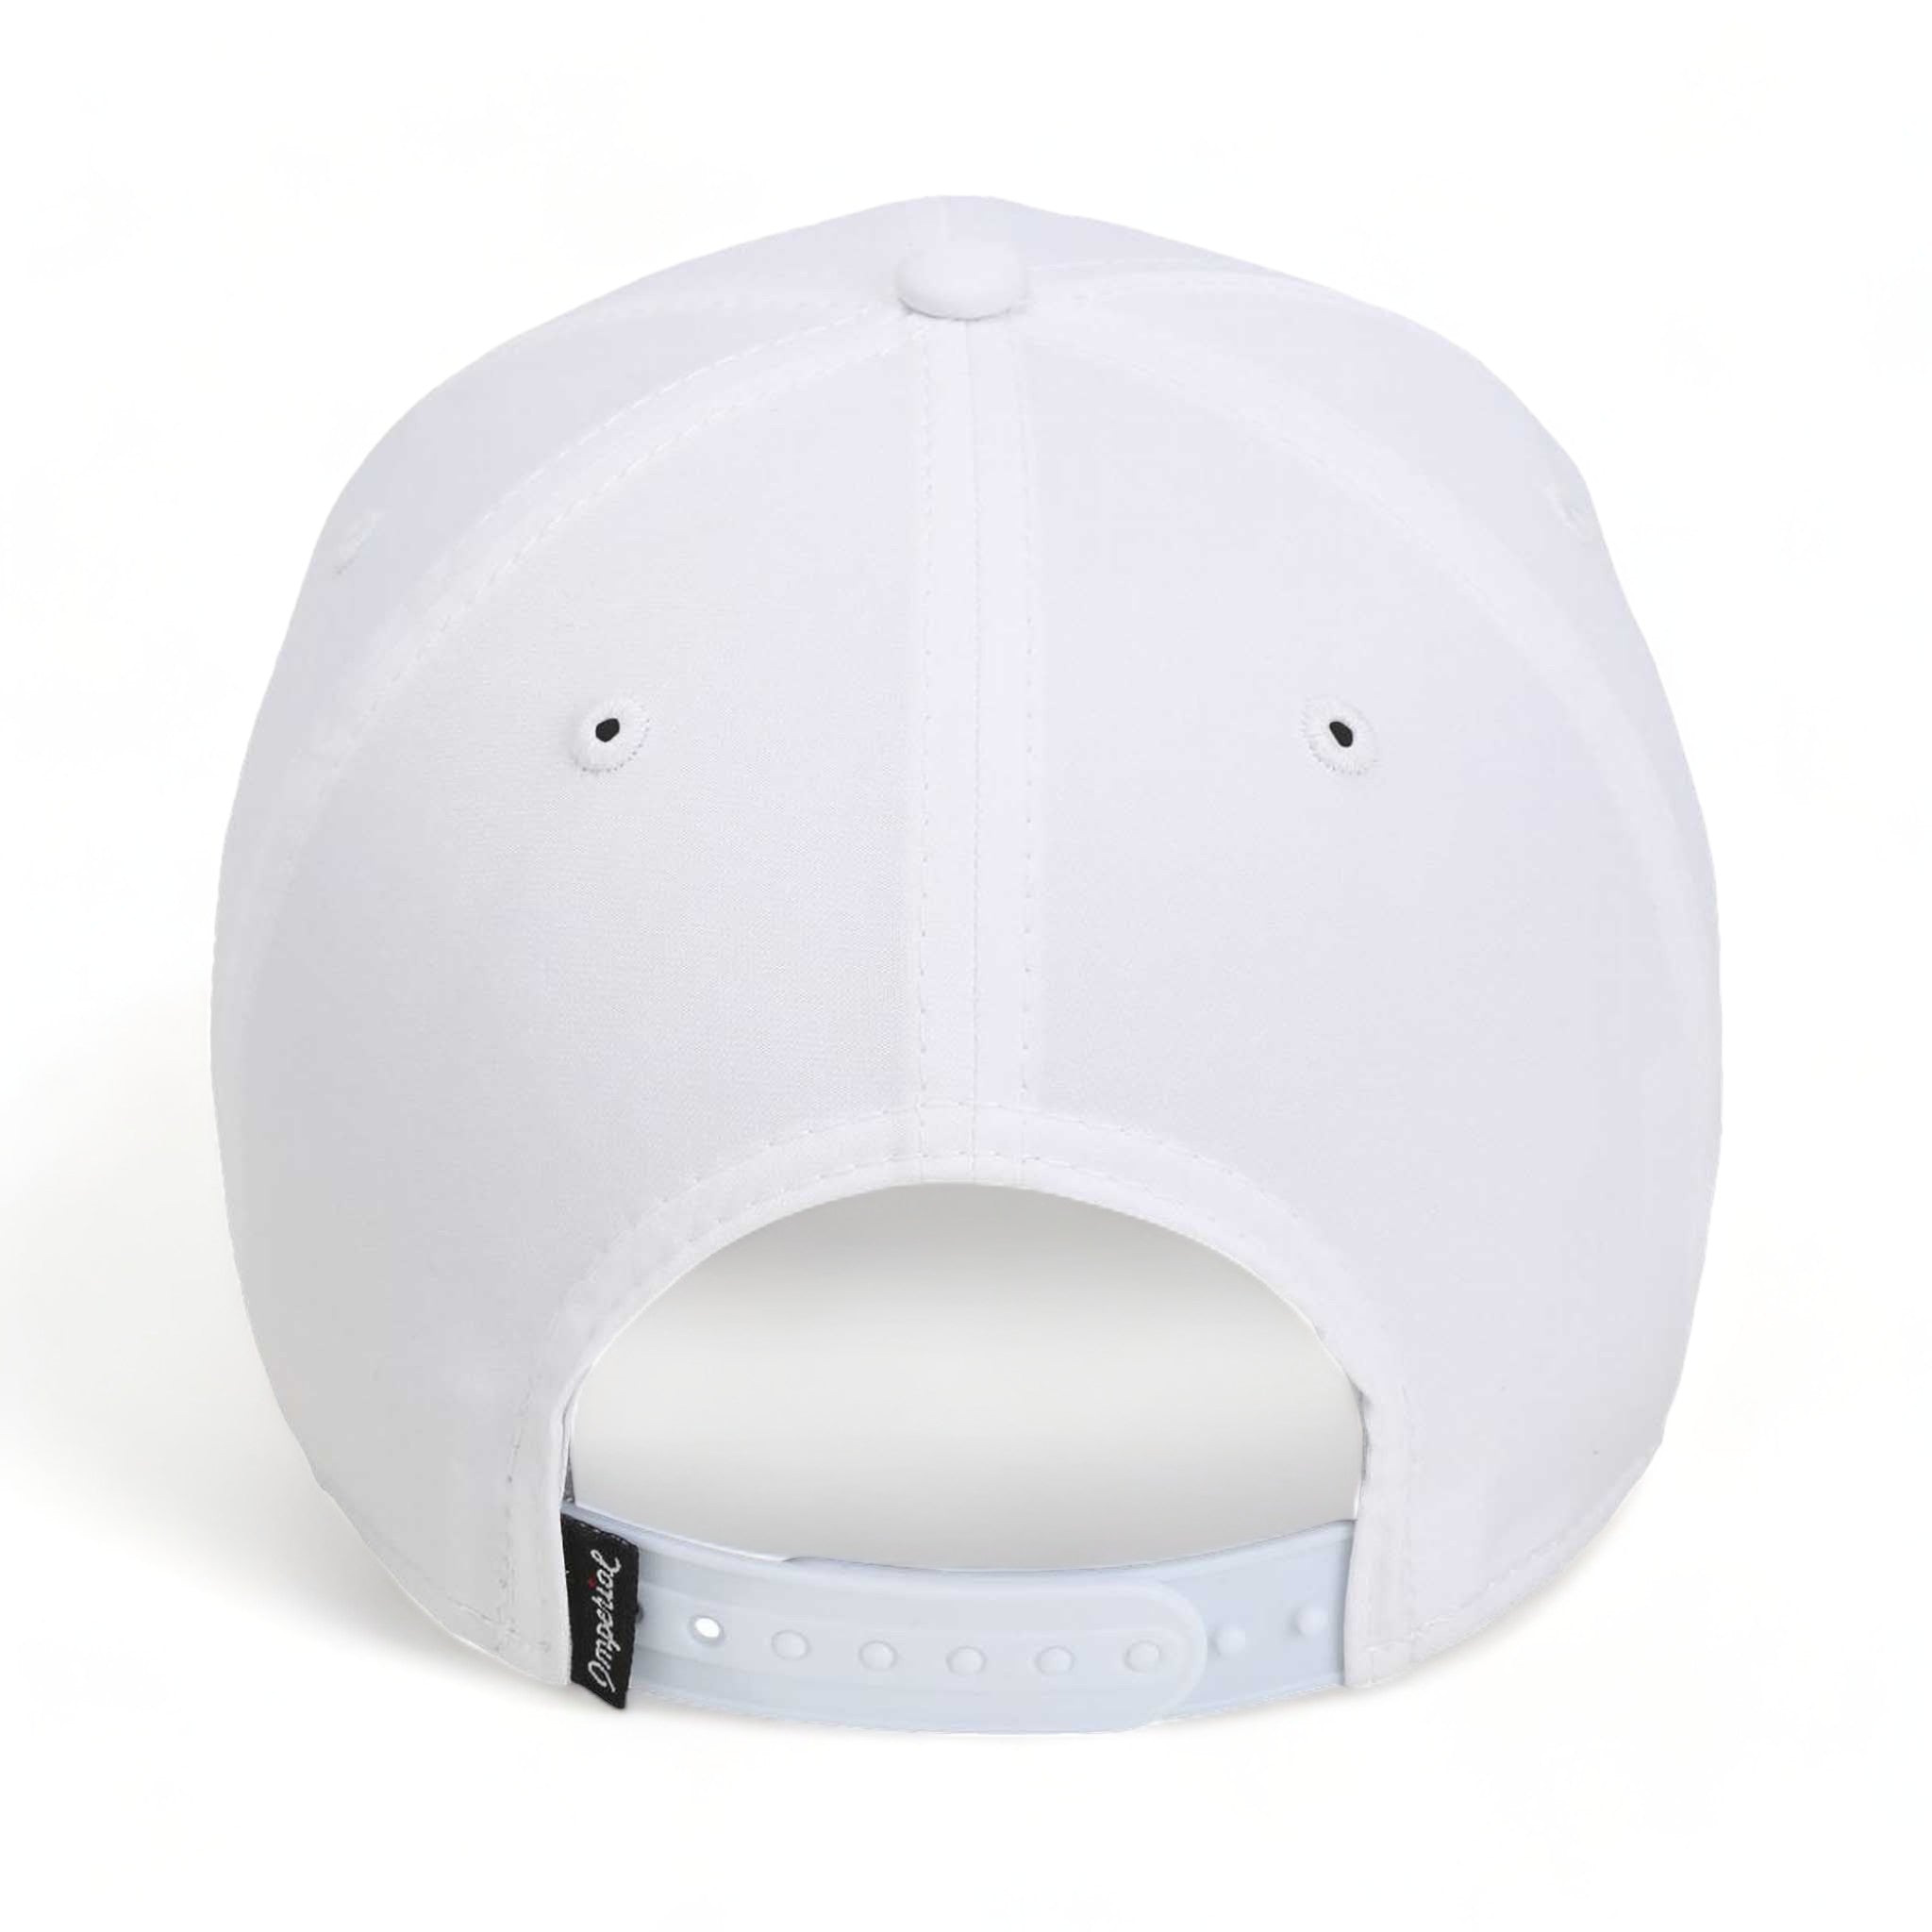 Back view of Imperial 7054 custom hat in white and red